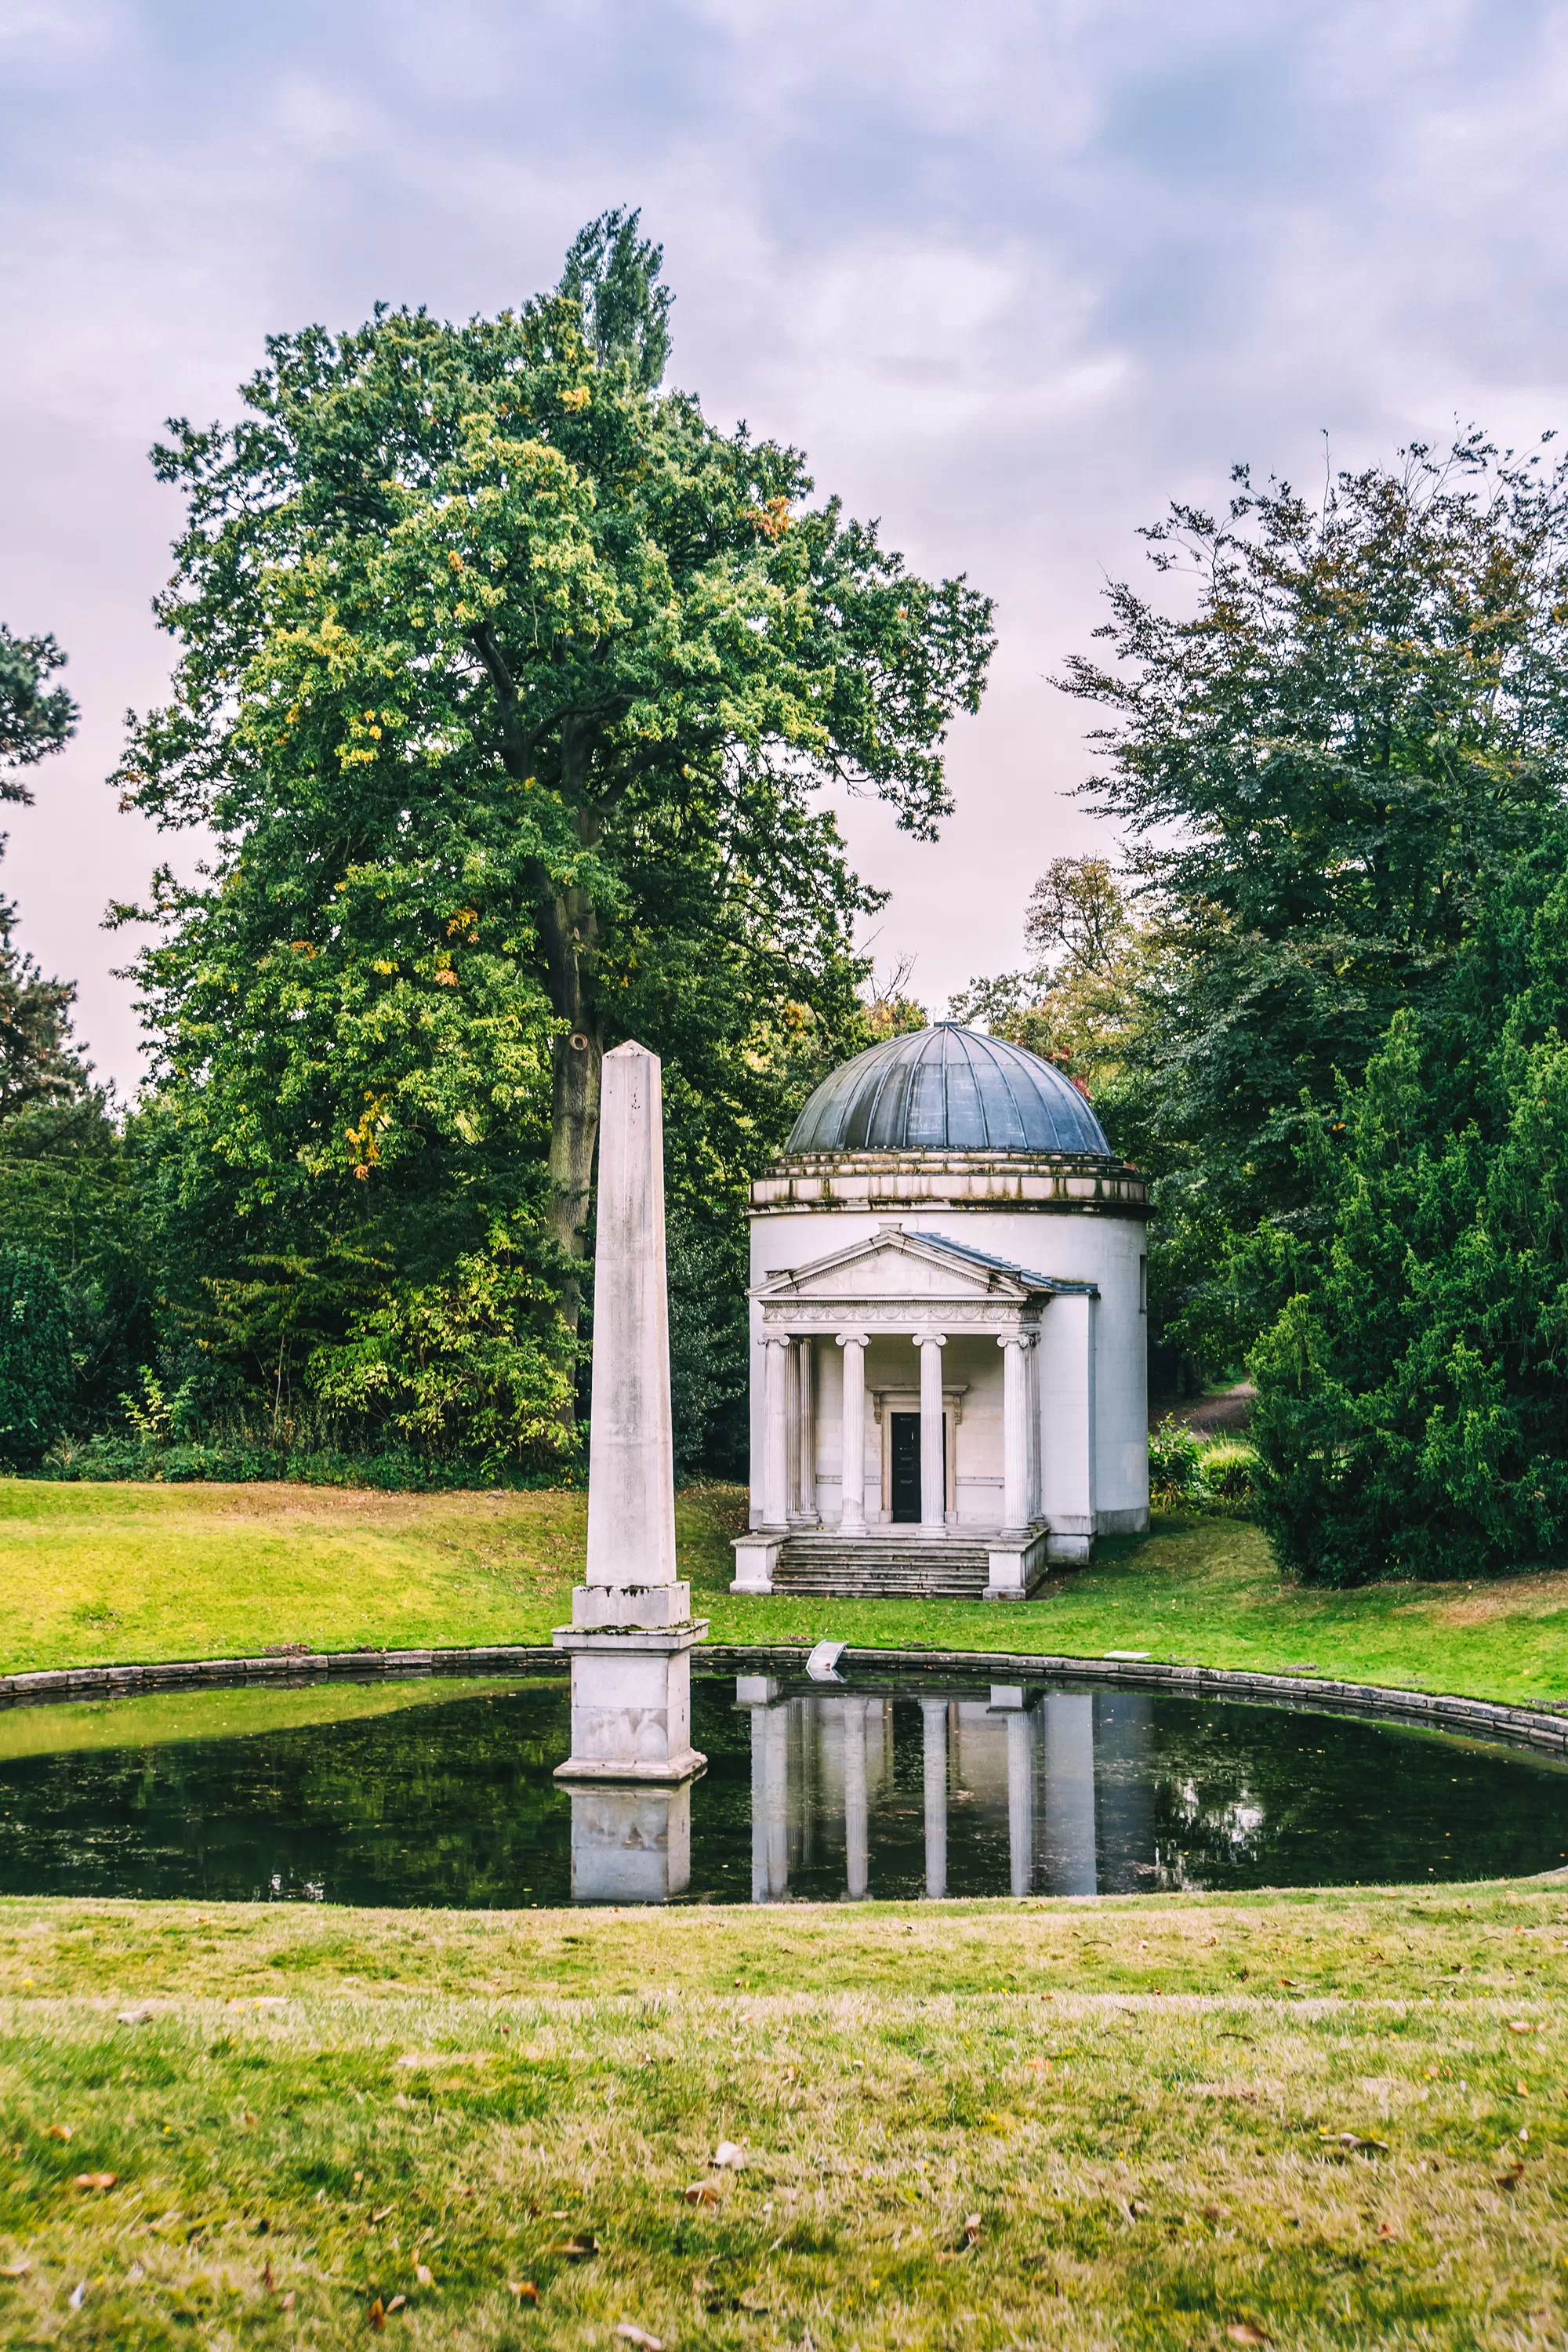 Unusual things to do in London - chiswick house lake